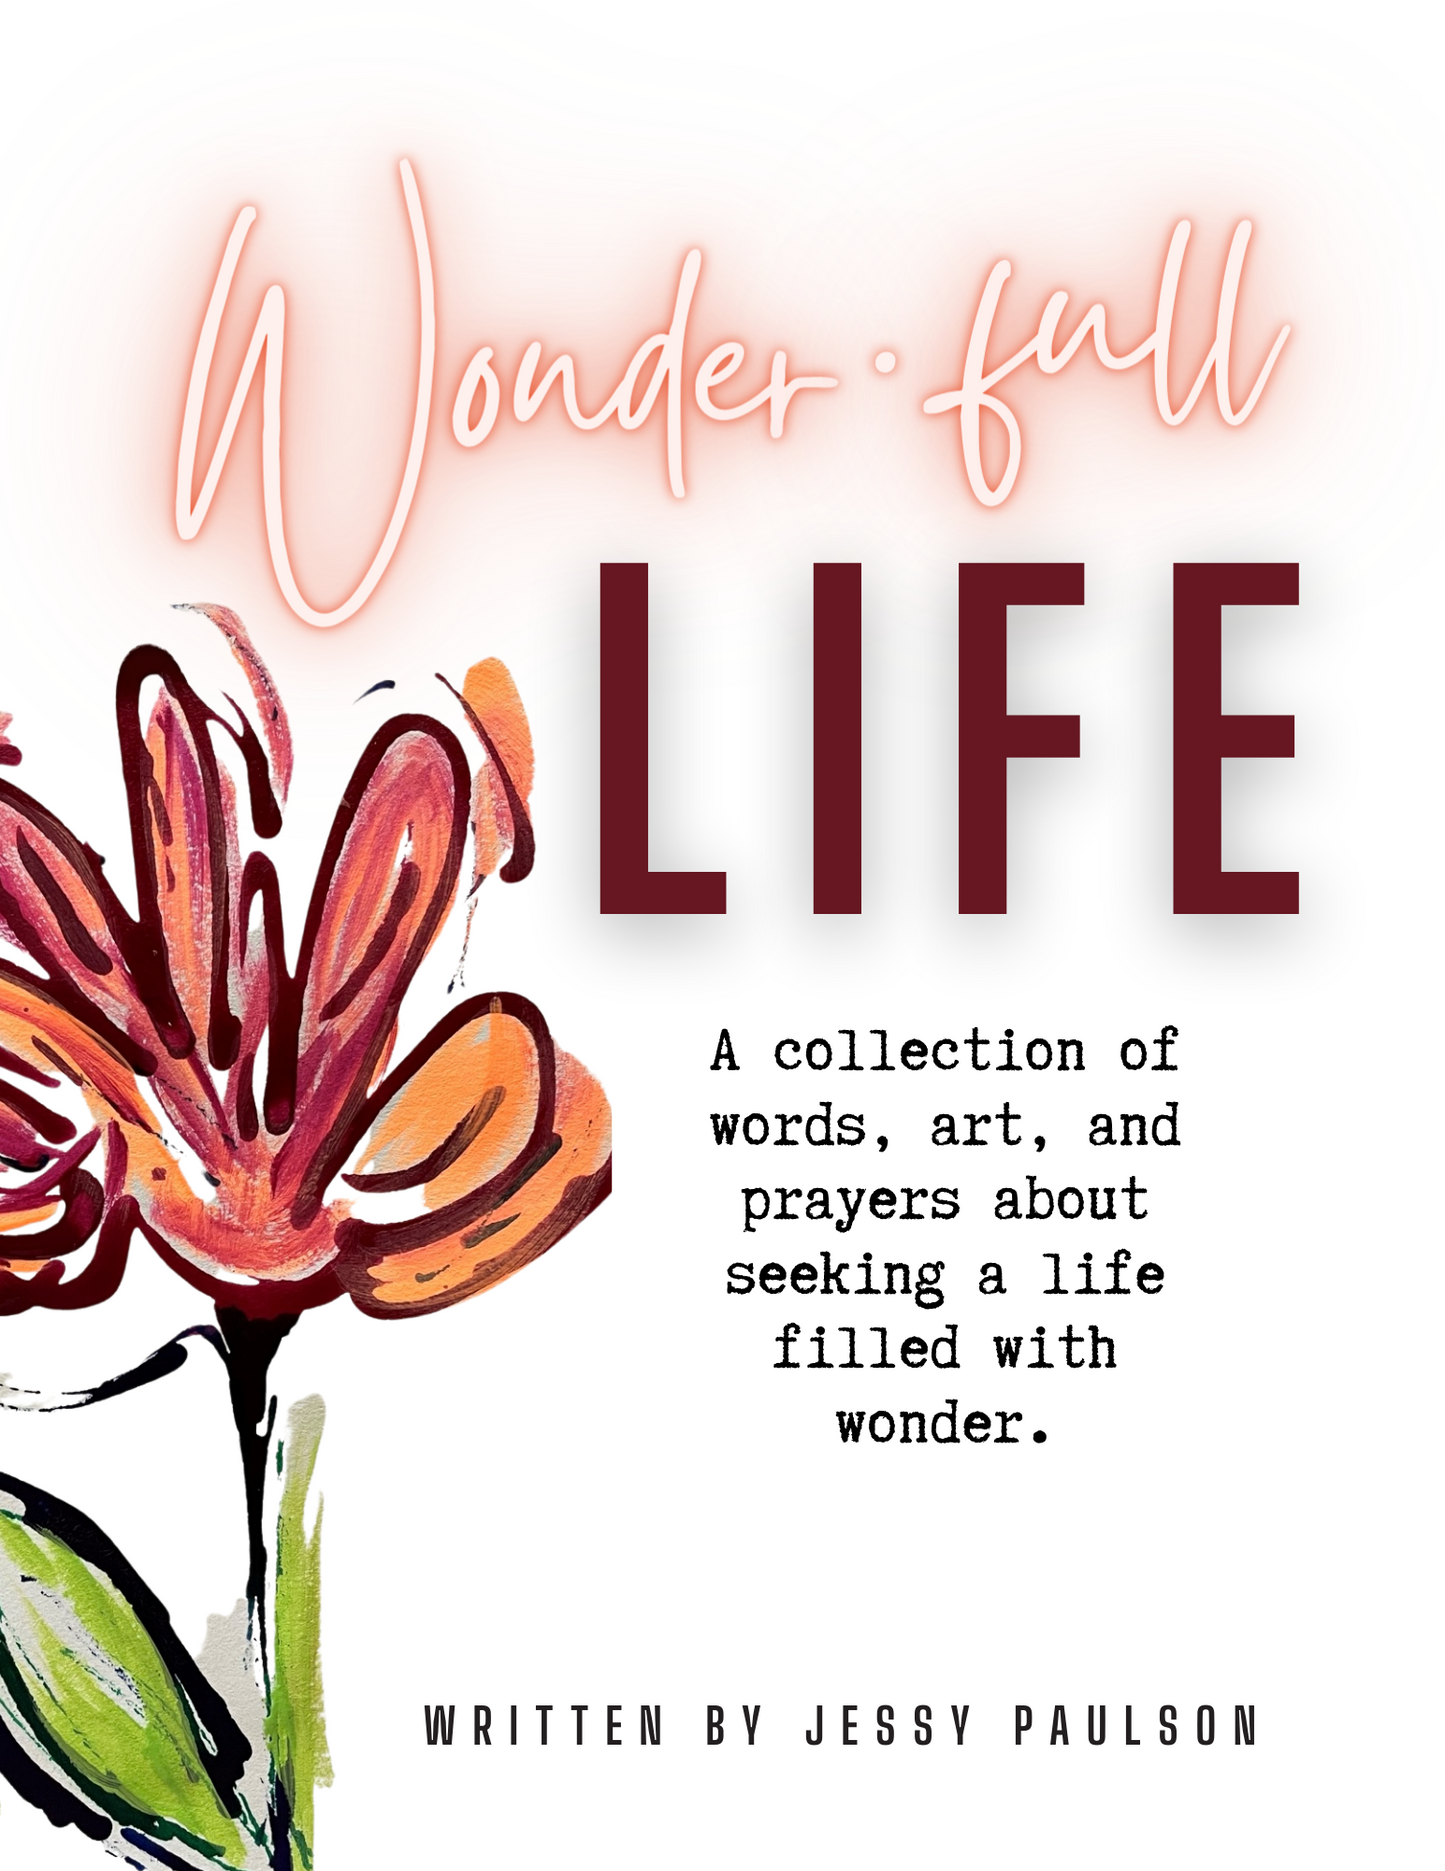 Wonder.full Life: A collection of words, art, and prayers about seeking a life filled with wonder.